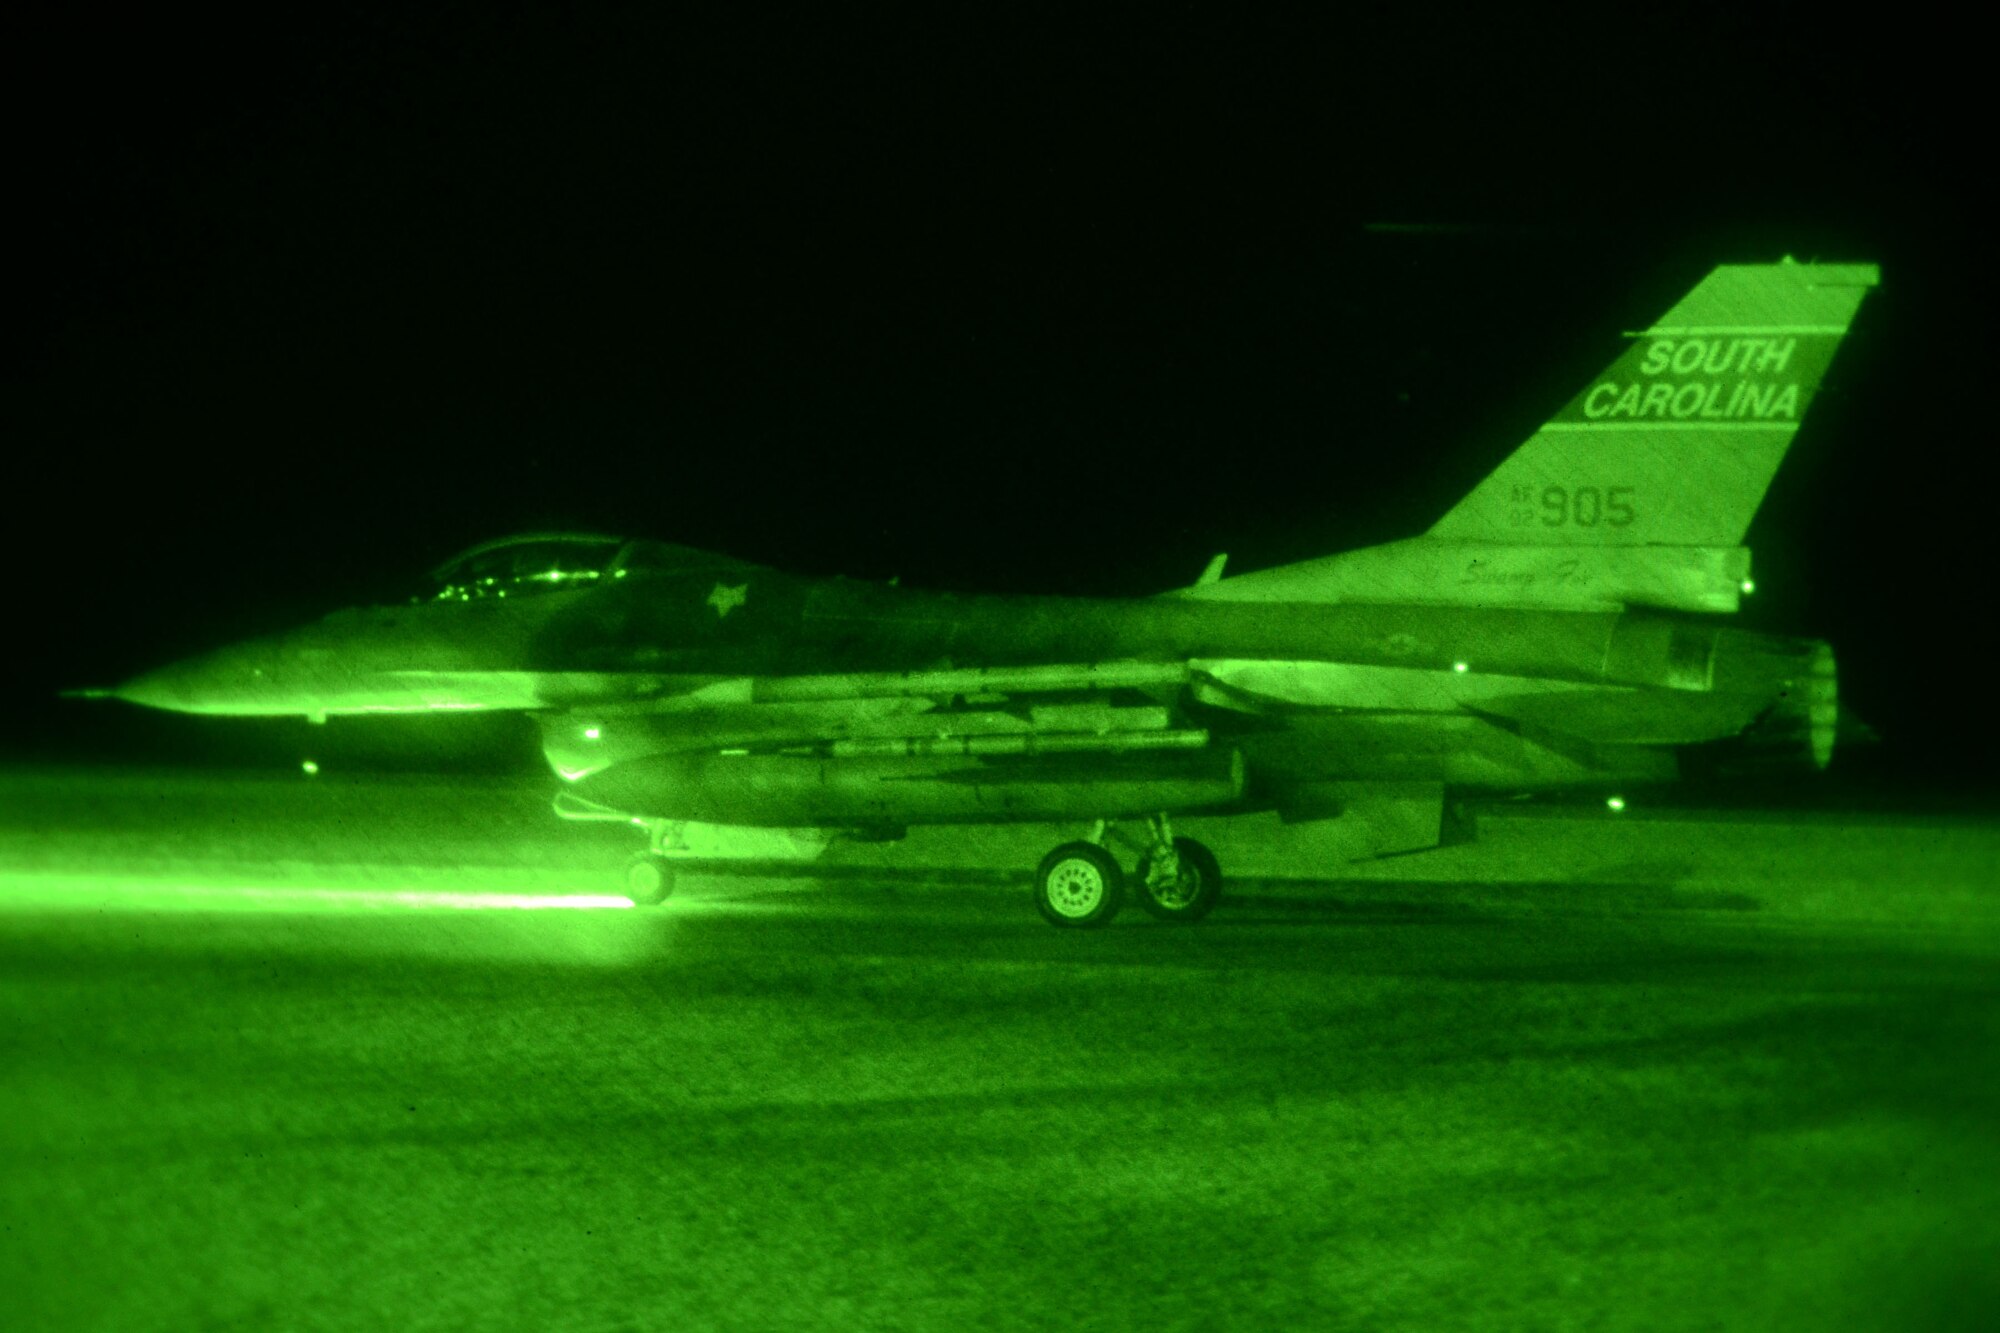 A U.S. Air Force fighter pilot, assigned to the 157th Fighter Squadron at McEntire Joint National Guard Base, South Carolina Air National Guard, taxis to launch an F-16 Fighting Falcon during surge flying operations Feb. 7, 2015.  The surge encompasses high tempo flying as part of vital training for deployments. (U.S. Air National Guard photo by Amn Megan Floyd/Released)